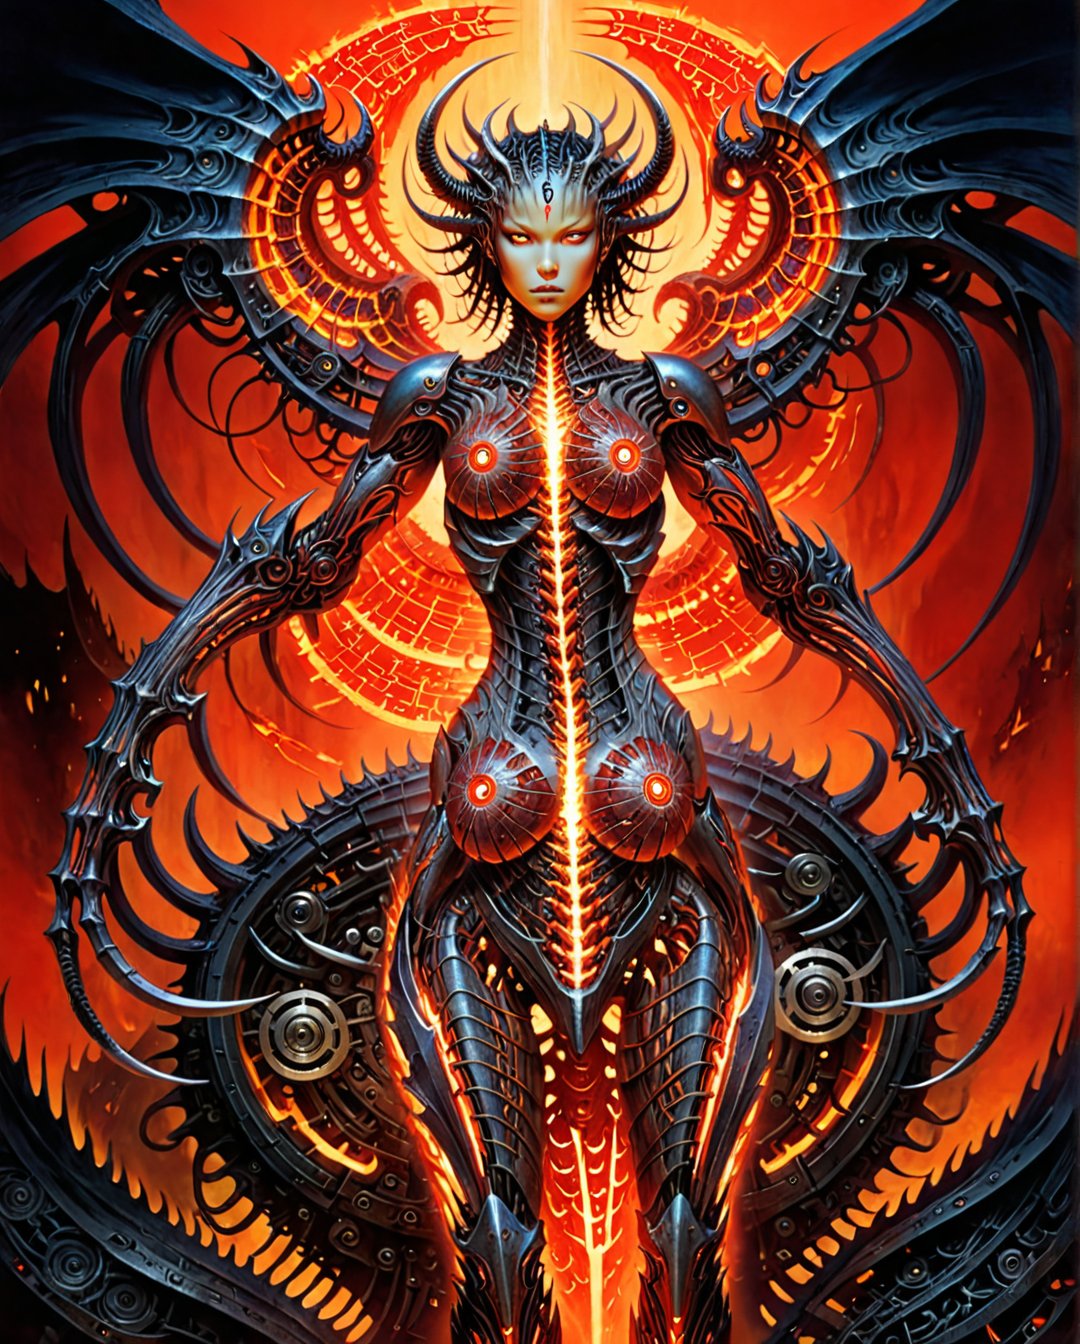 1 female,  beautiful
biomechanical
gradient detailed arms detailed body mechanical arms 
lava
demons, glowing  runes
art by Tsutomu Nihei gerald-brom